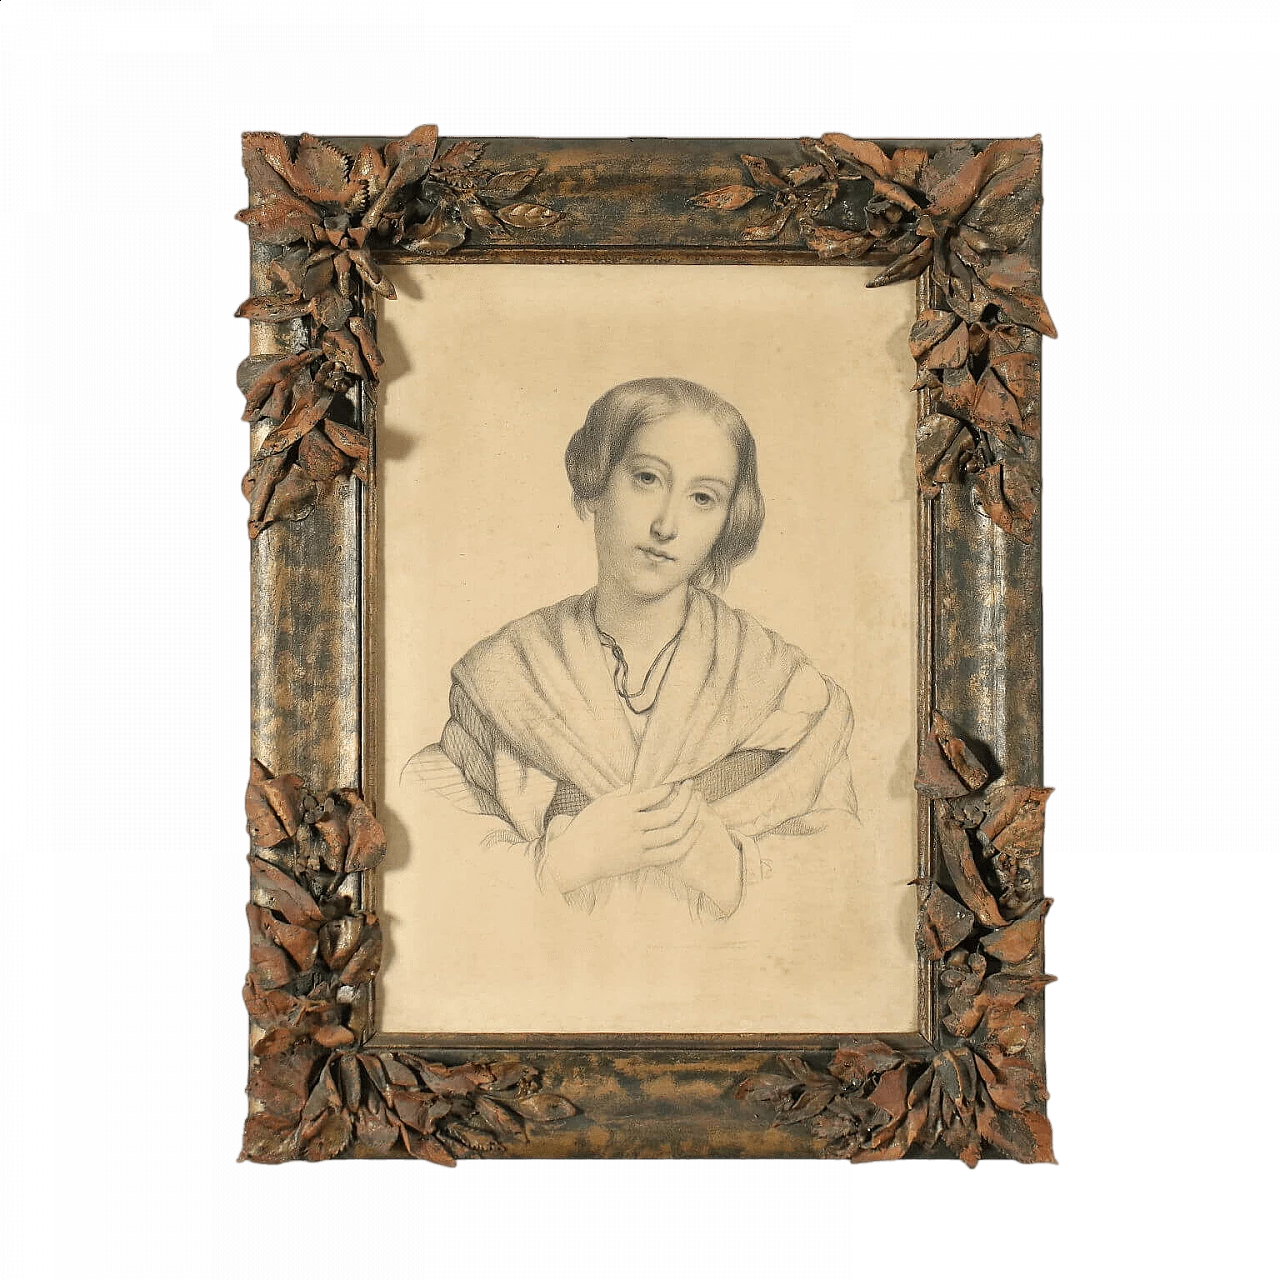 Young woman portrait, pencil drawing on paper, 19th century 10